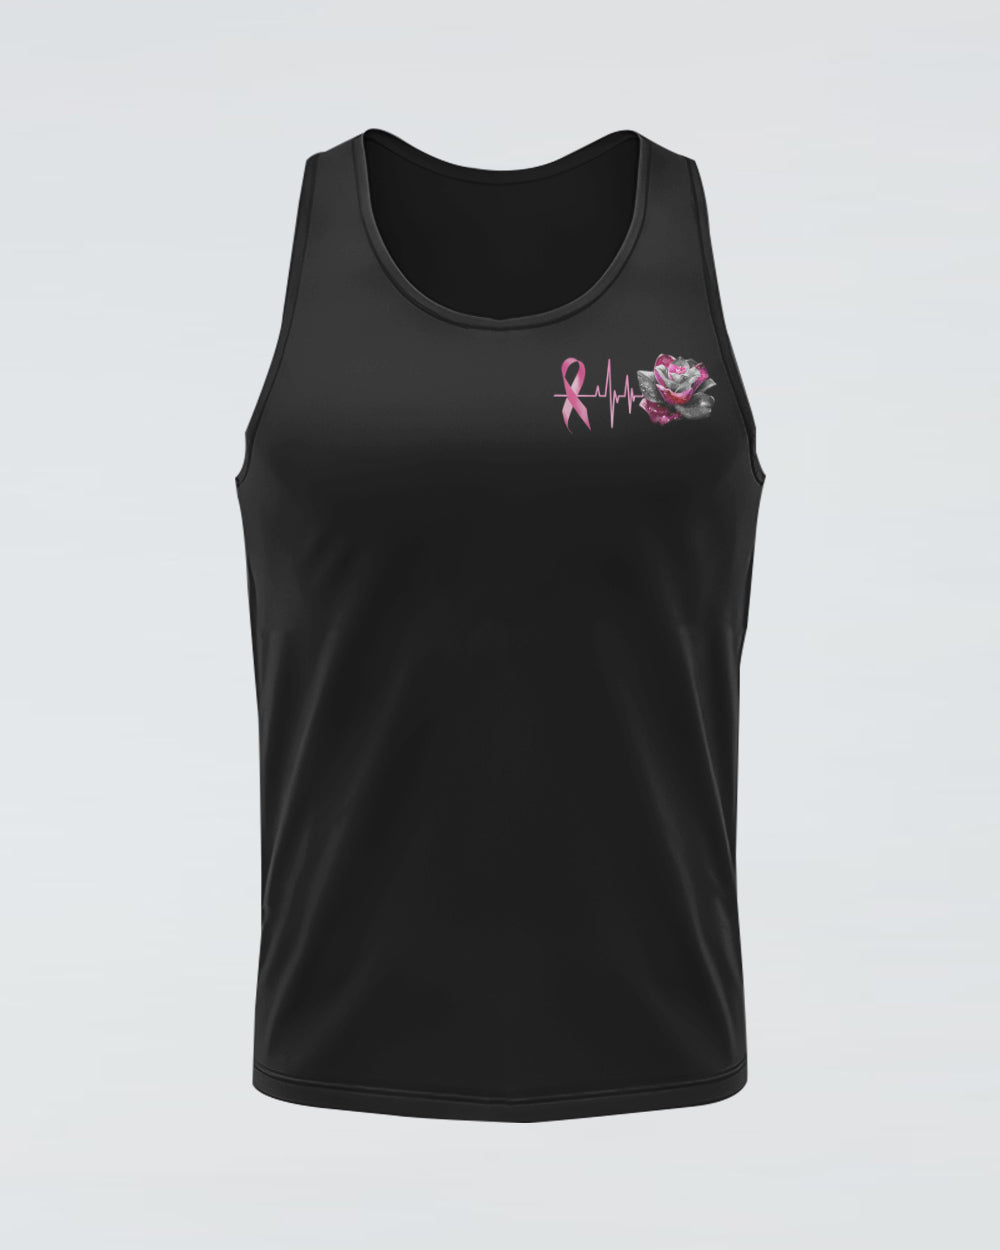 I Survived Because The Fire Inside Of Me Rose Cross Women's Breast Cancer Awareness Tanks